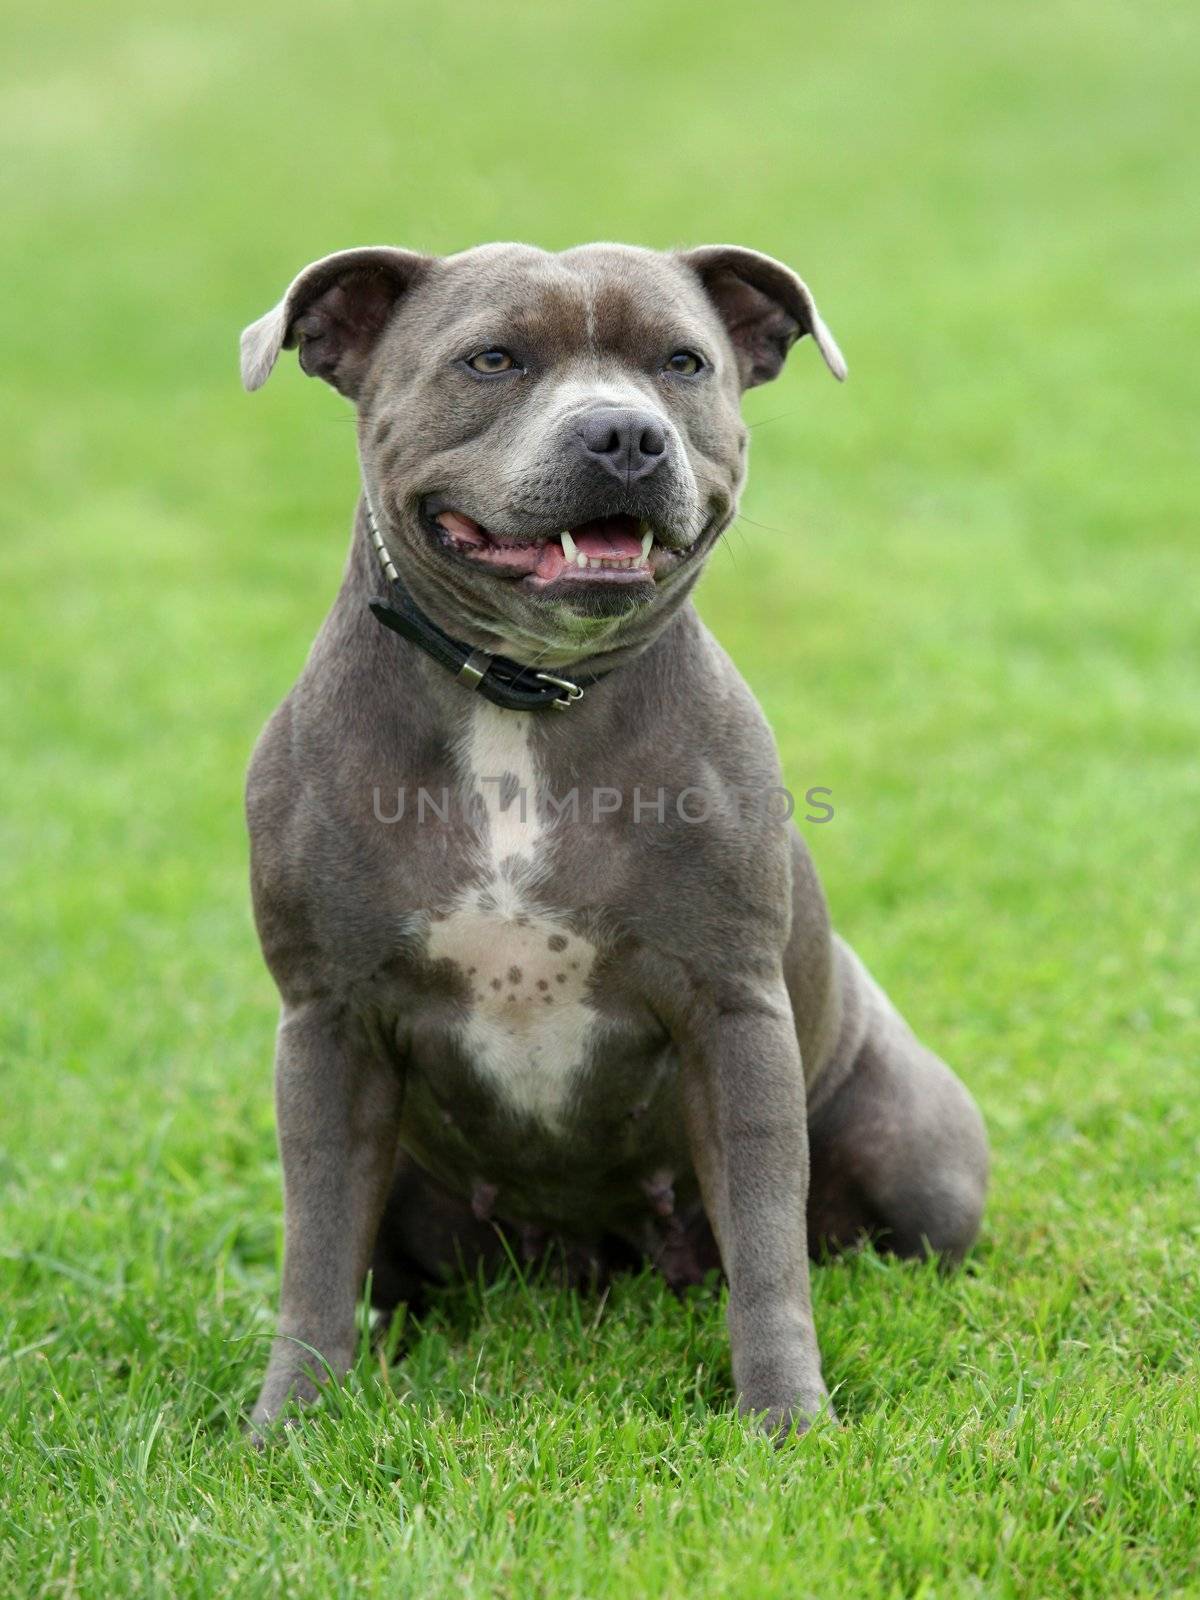 Portrait of a nice American staffordshire terrier